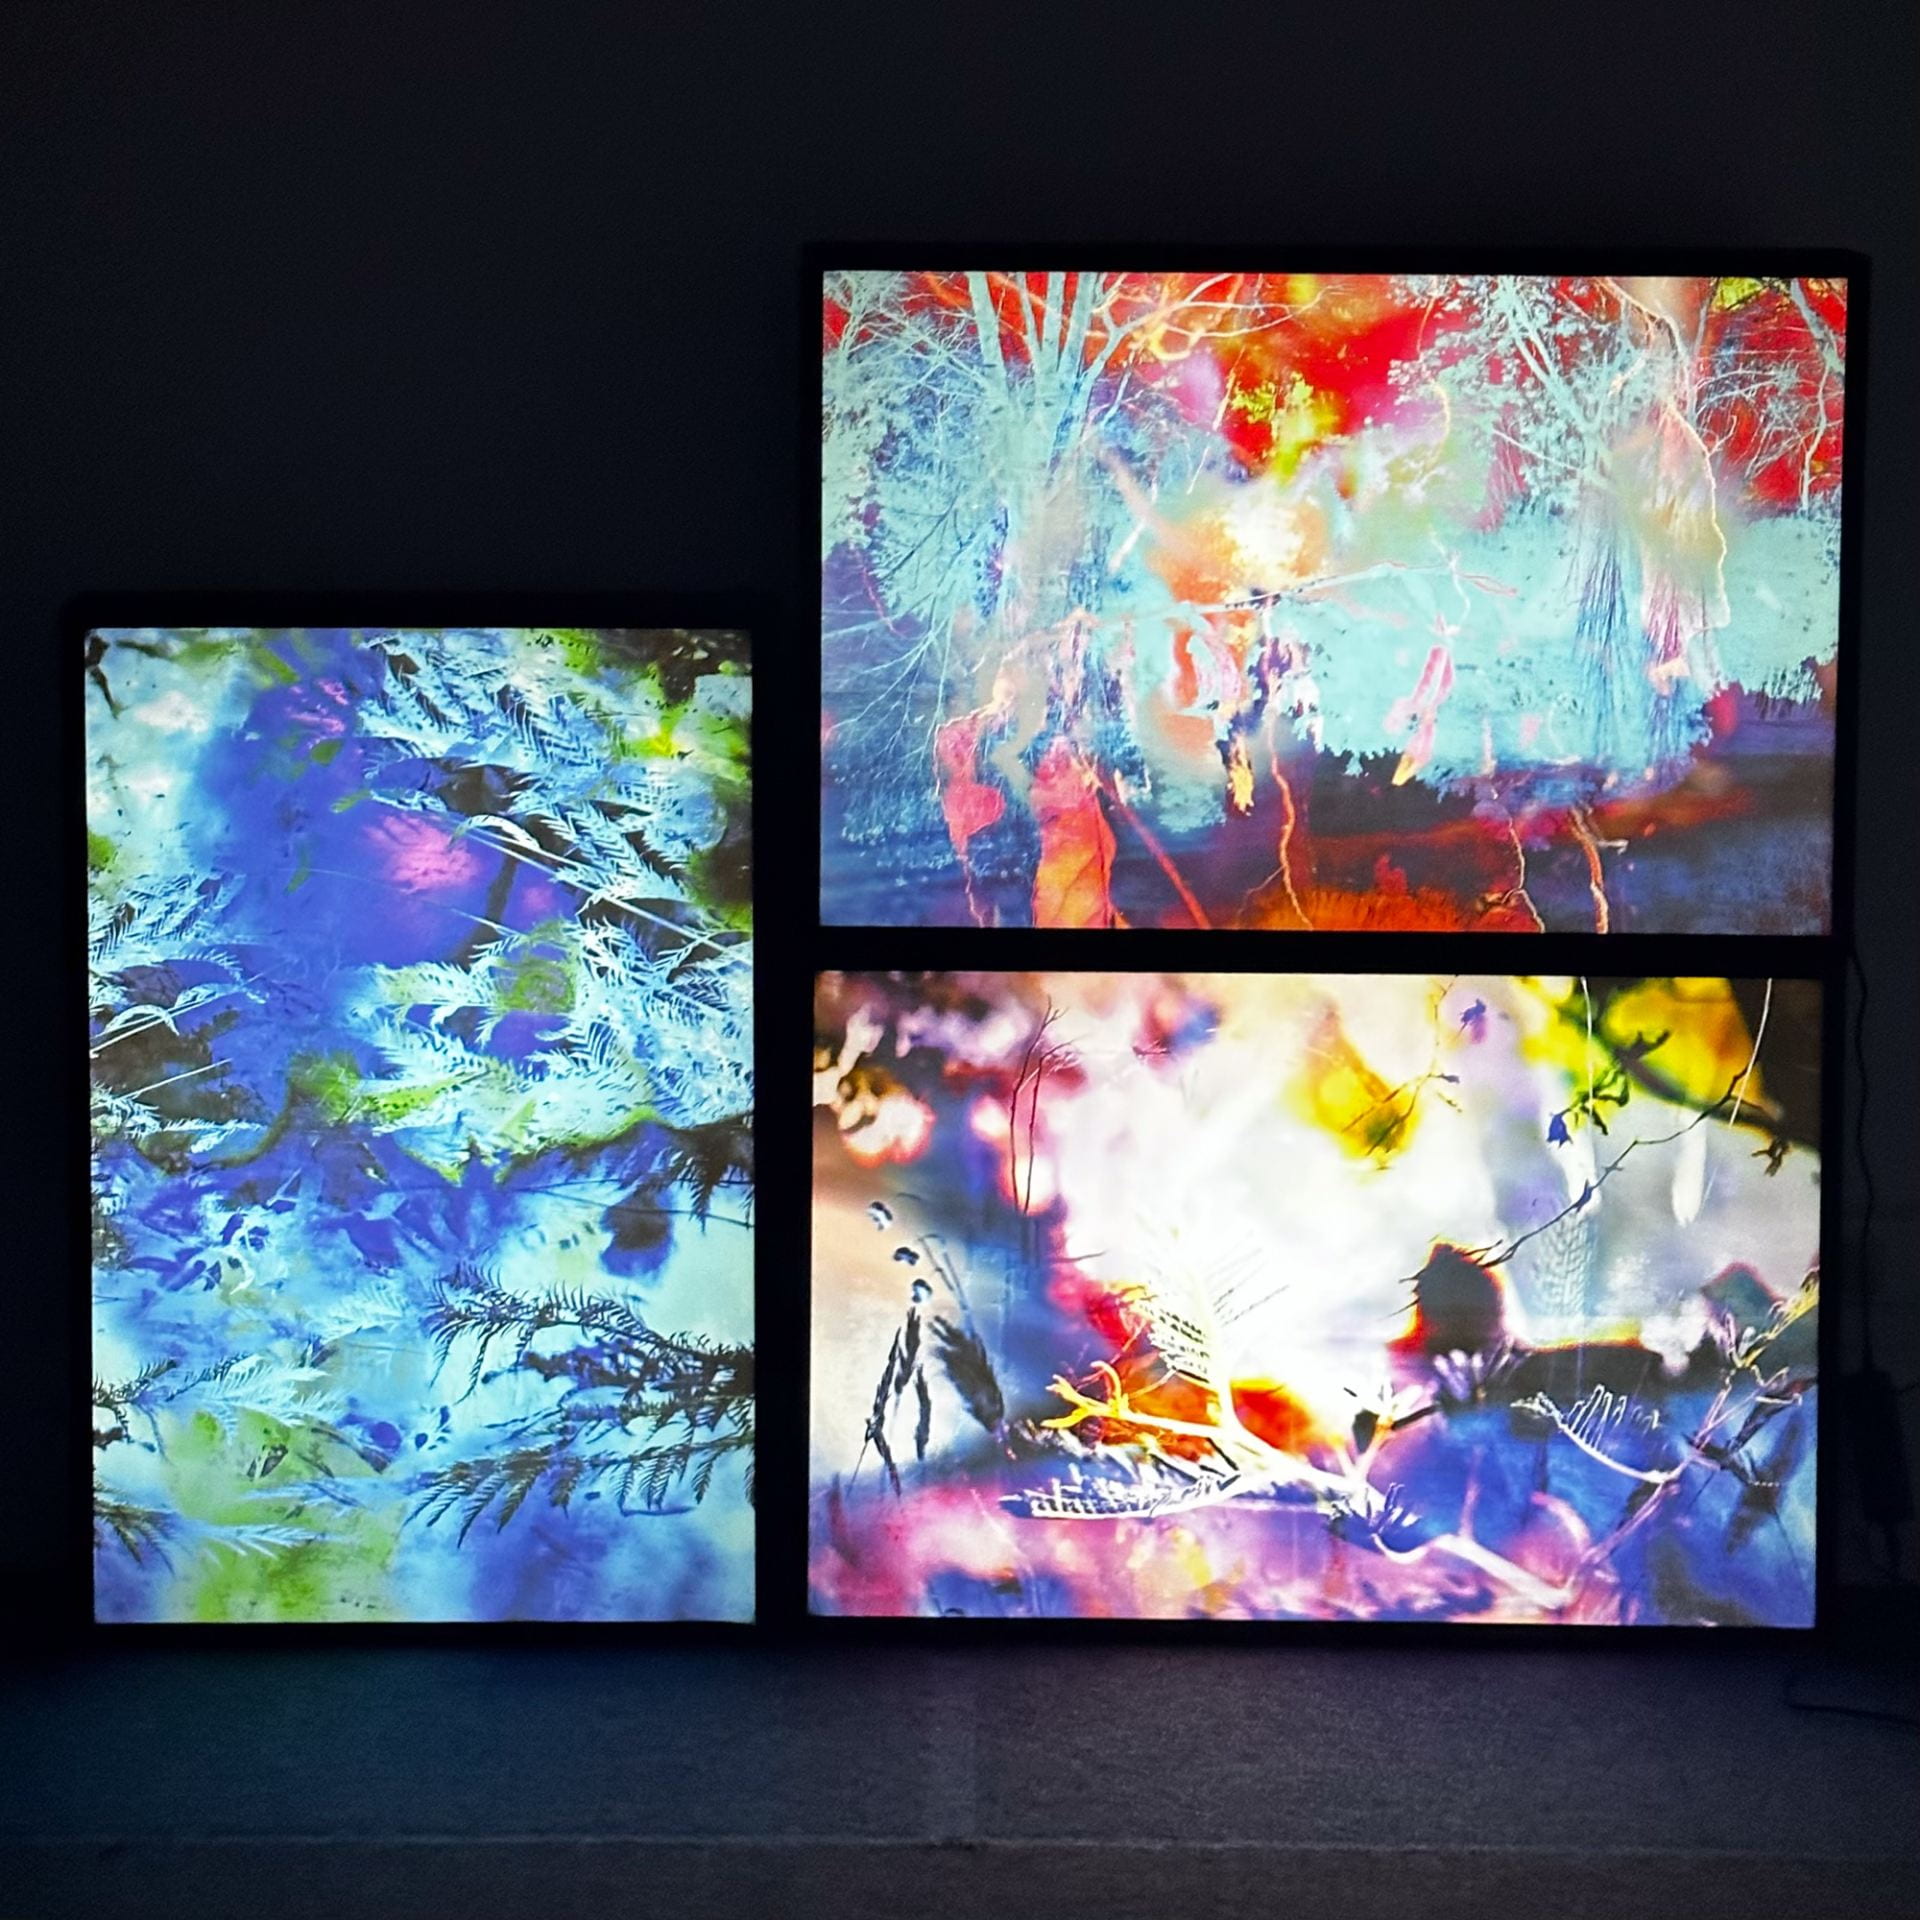 Installation view of three lightboxes with abstract landscape images